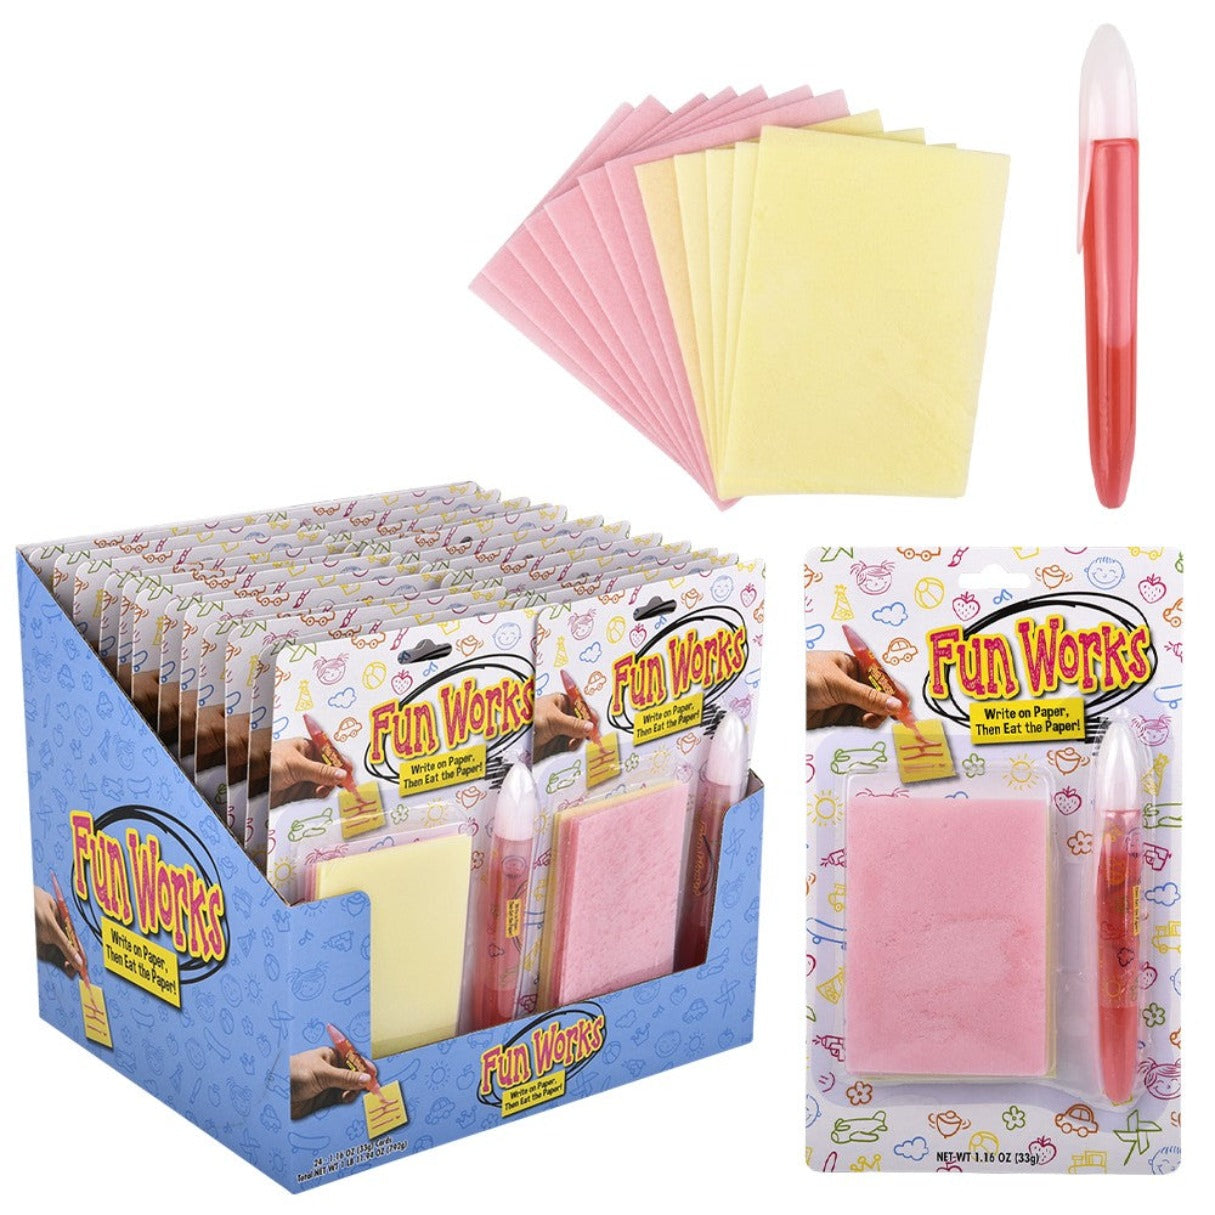 Fun Works Write and Eat Paper 1.16oz  - 24ct